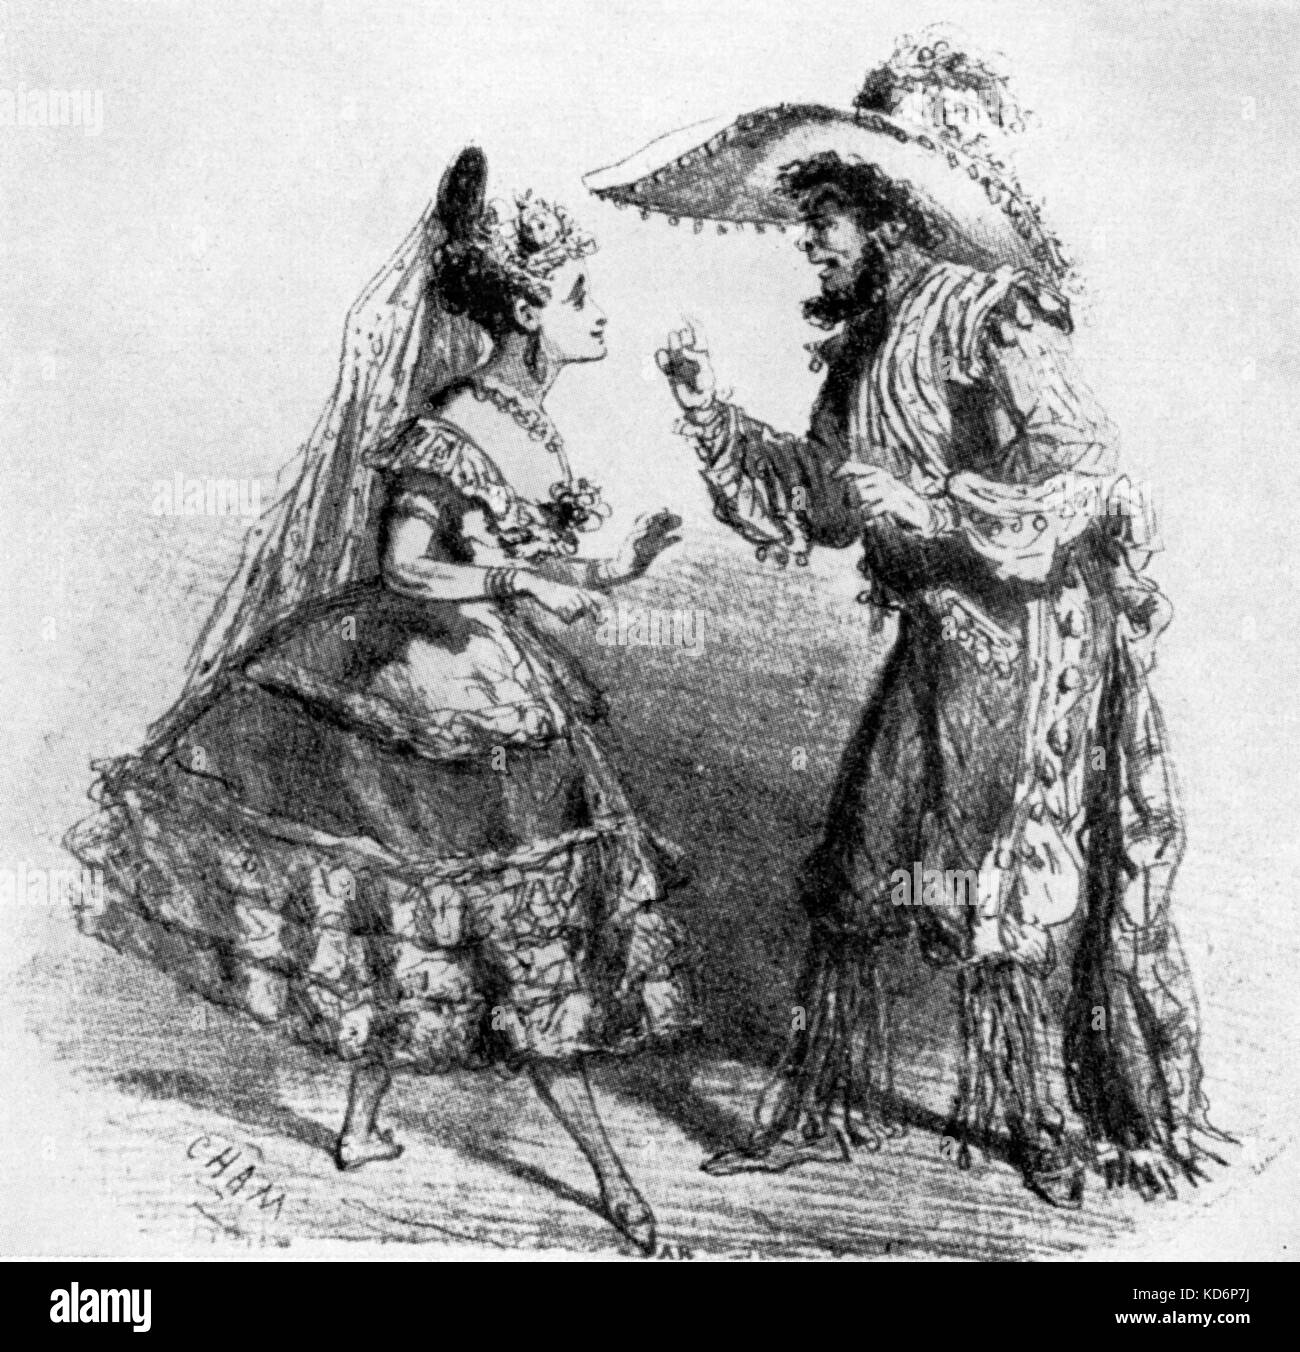 The Brazilian lady and the Shoemaker - drawing for  La Vie Parisenne   by Jacques Offenbach in 1866 Paris premiere.   German/French composer,  20 June 1819 - 5 October 1880. Stock Photo